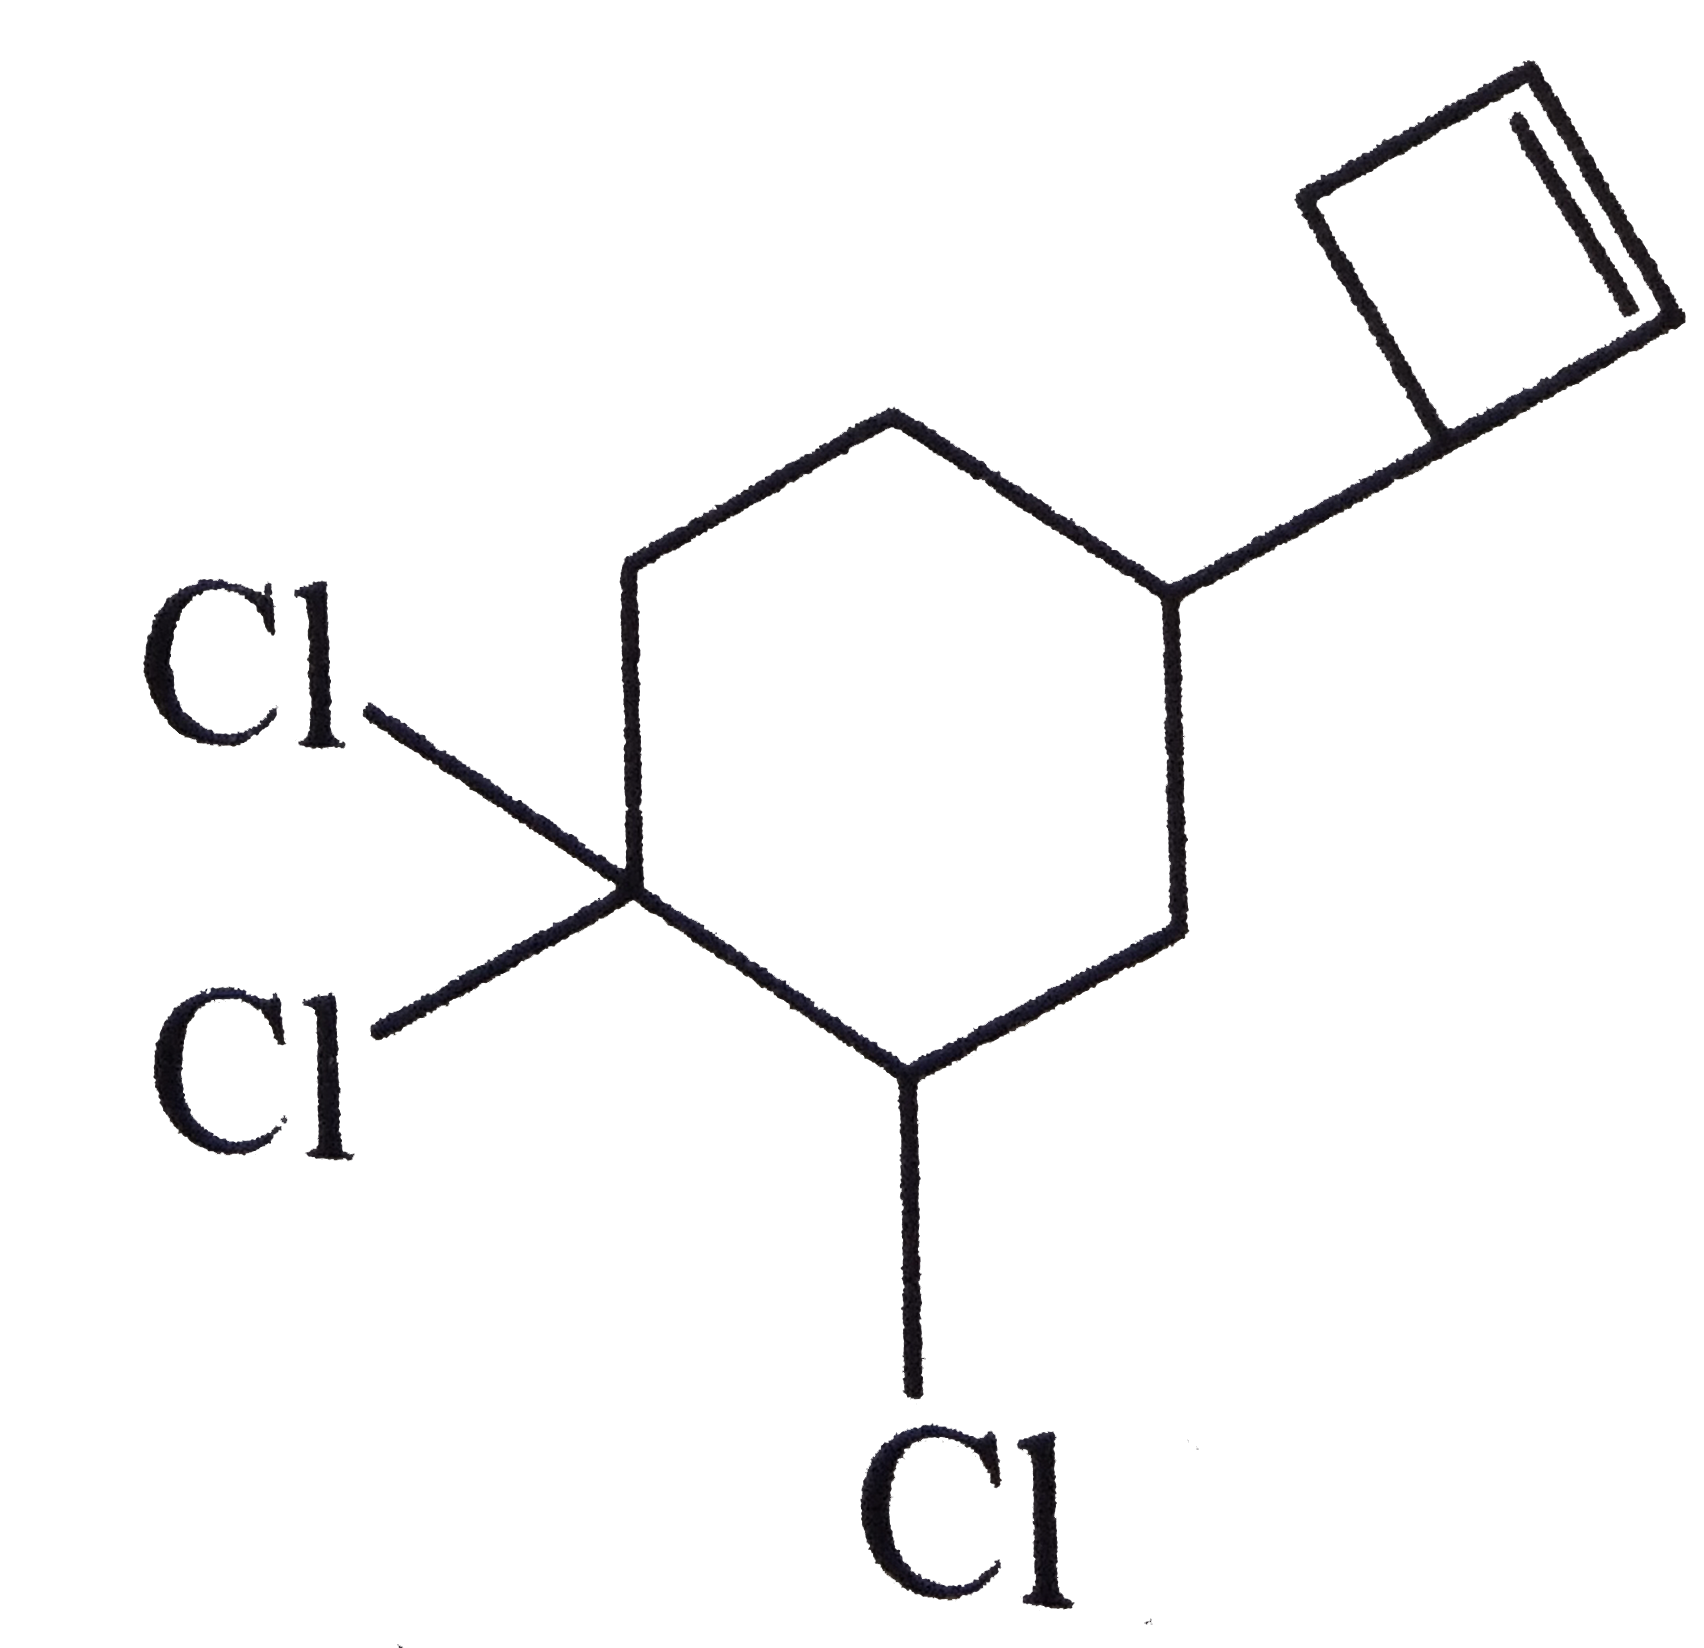 What is the correct IUPAC name of the compound shown below?